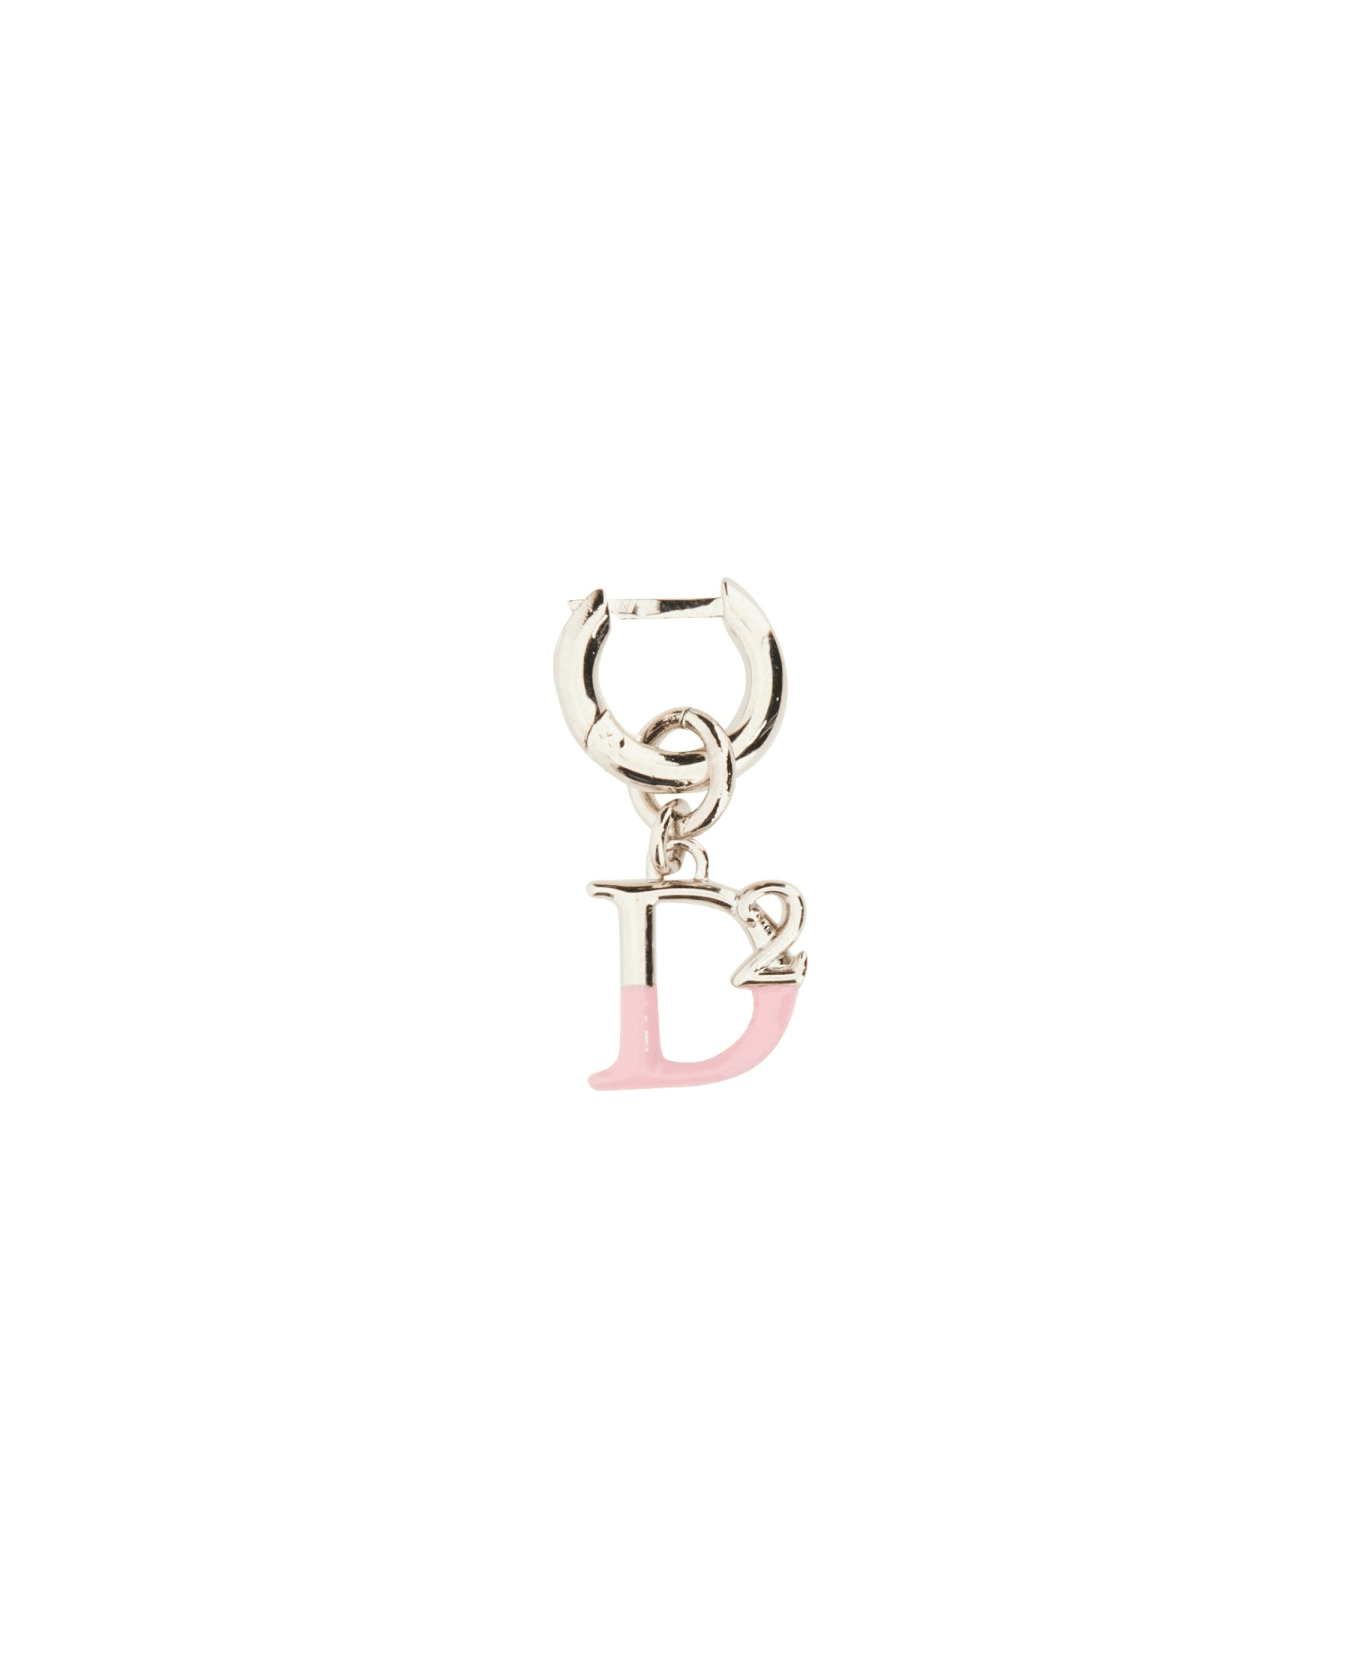 Dsquared2 Logo Earring - SILVER イヤリング